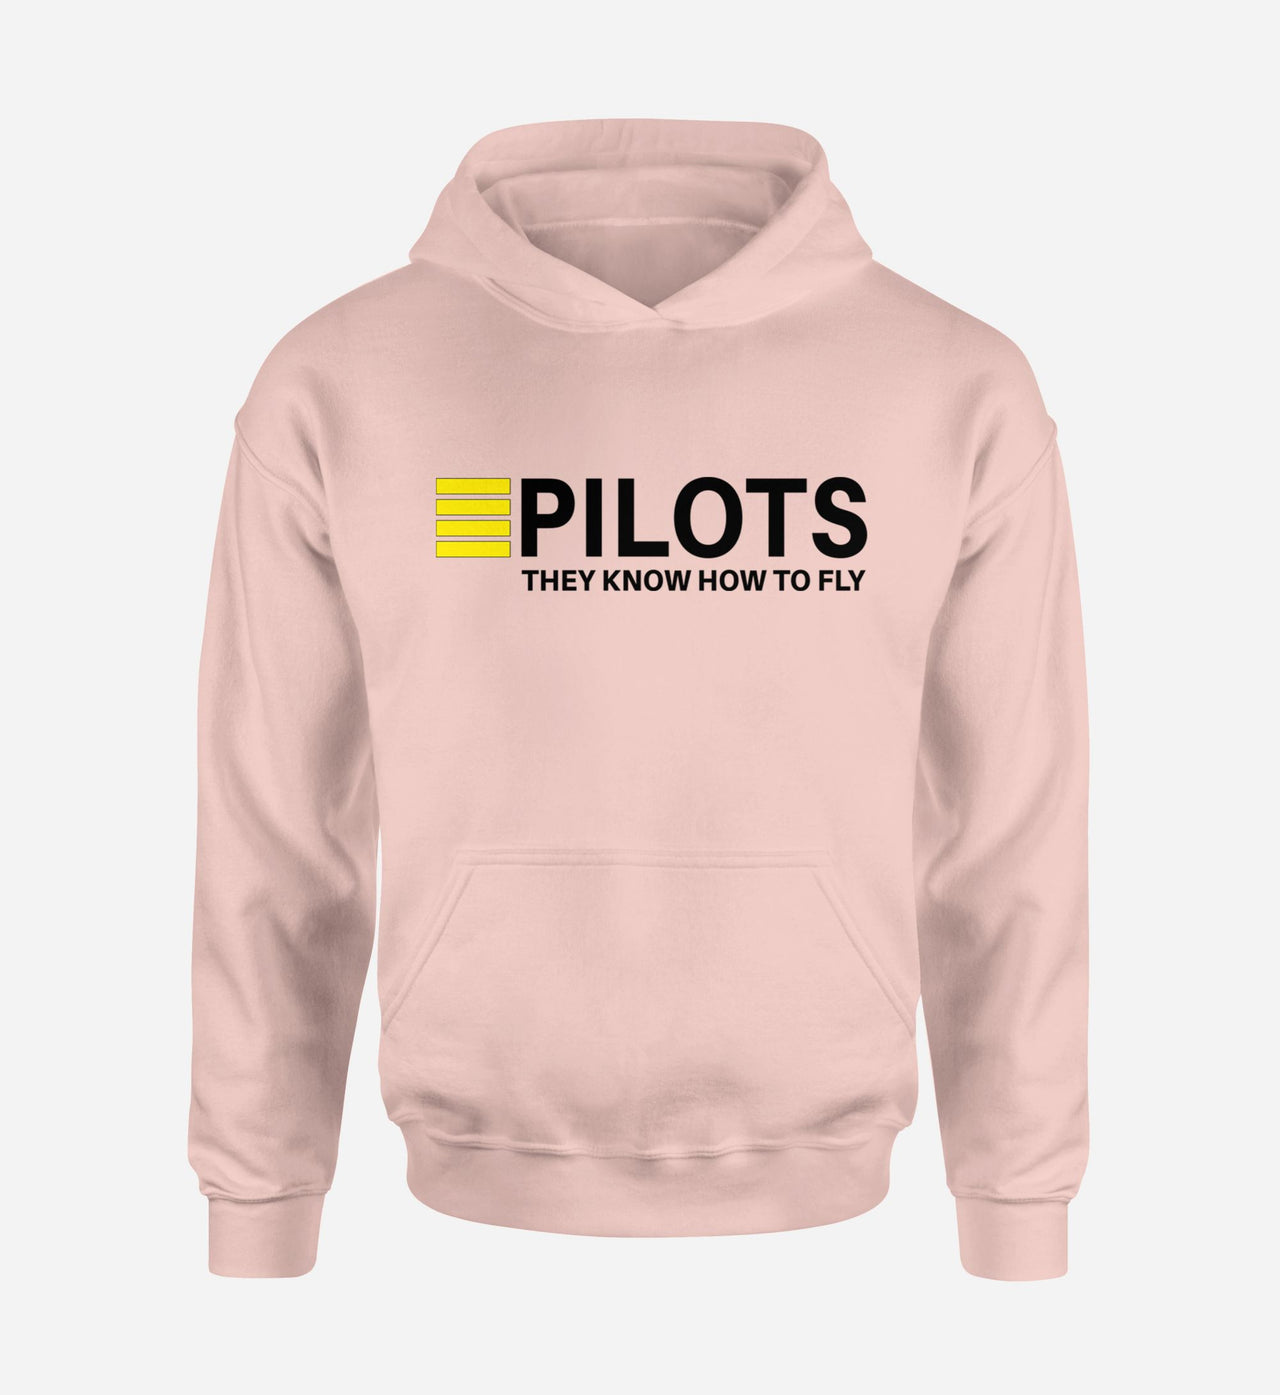 Pilots They Know How To Fly Designed Hoodies